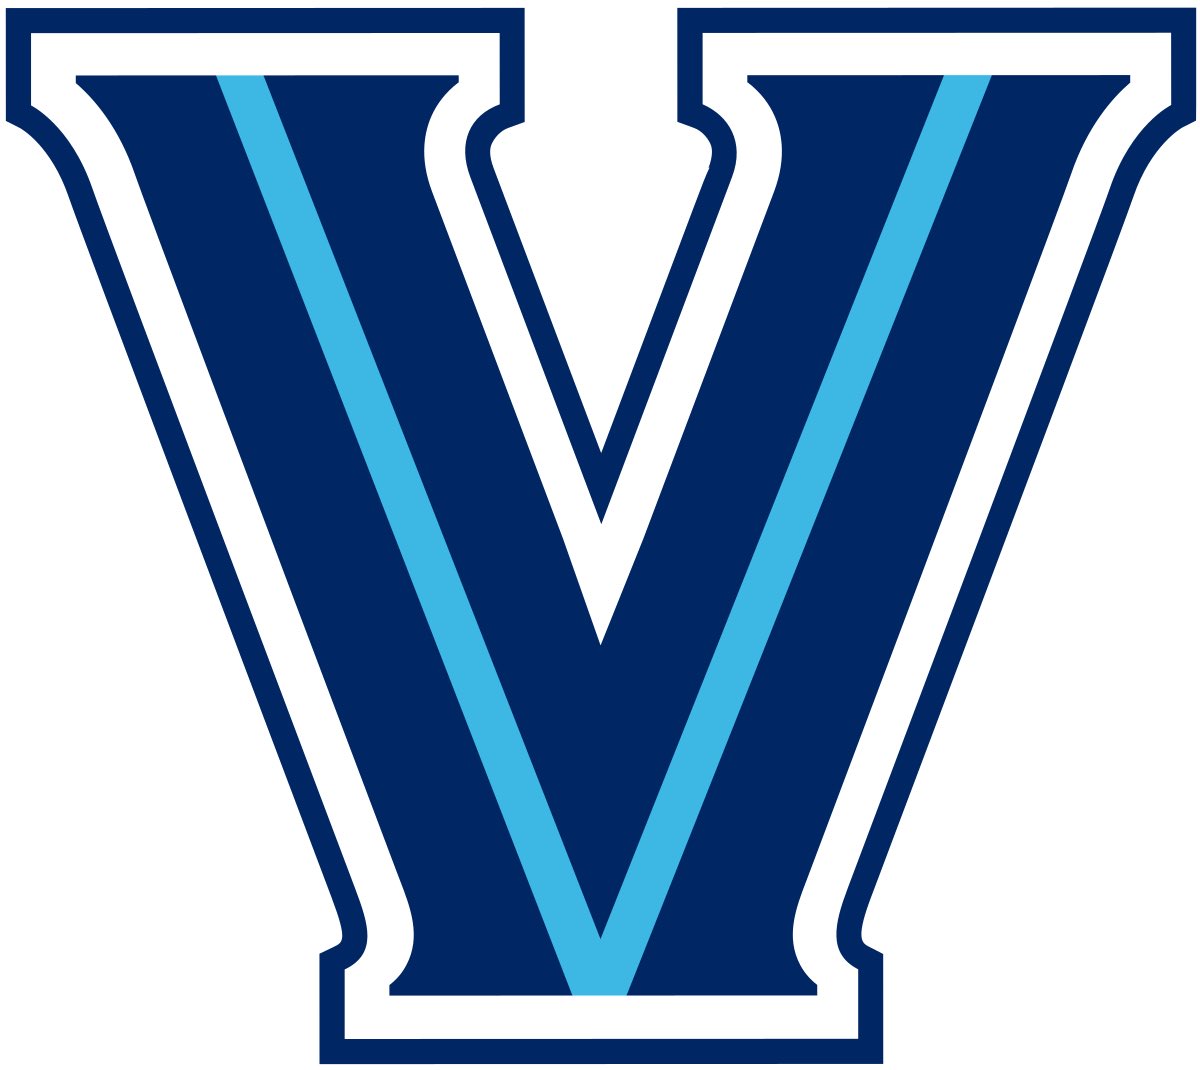 Thankful and excited to receive an offer from Villanova‼️#TapTheRock
@CoachRiede